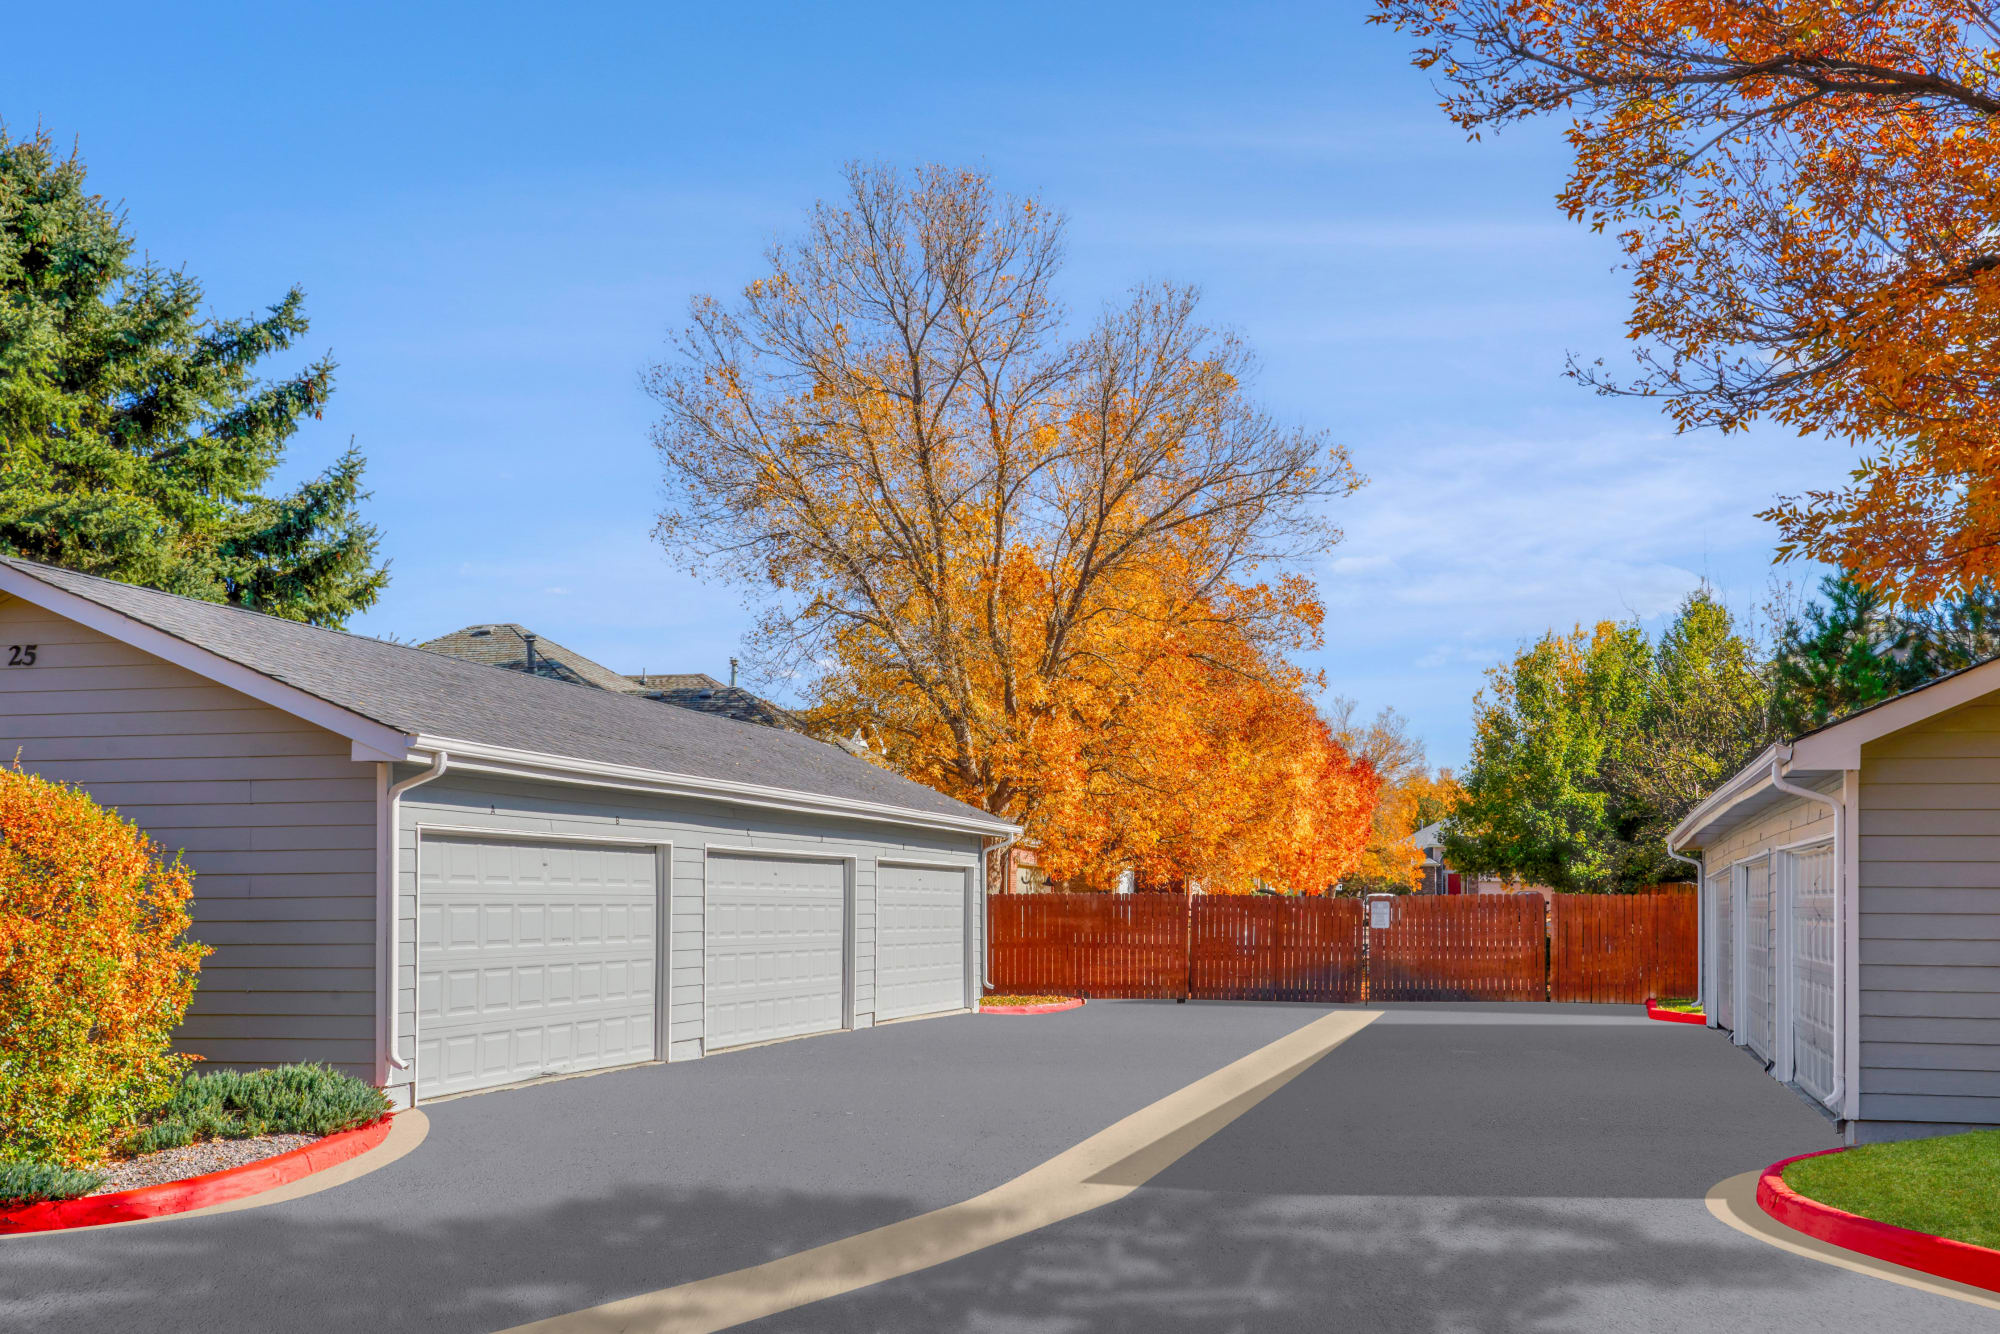 Garages Available for Rent at Arapahoe Club Apartments in Denver, Colorado